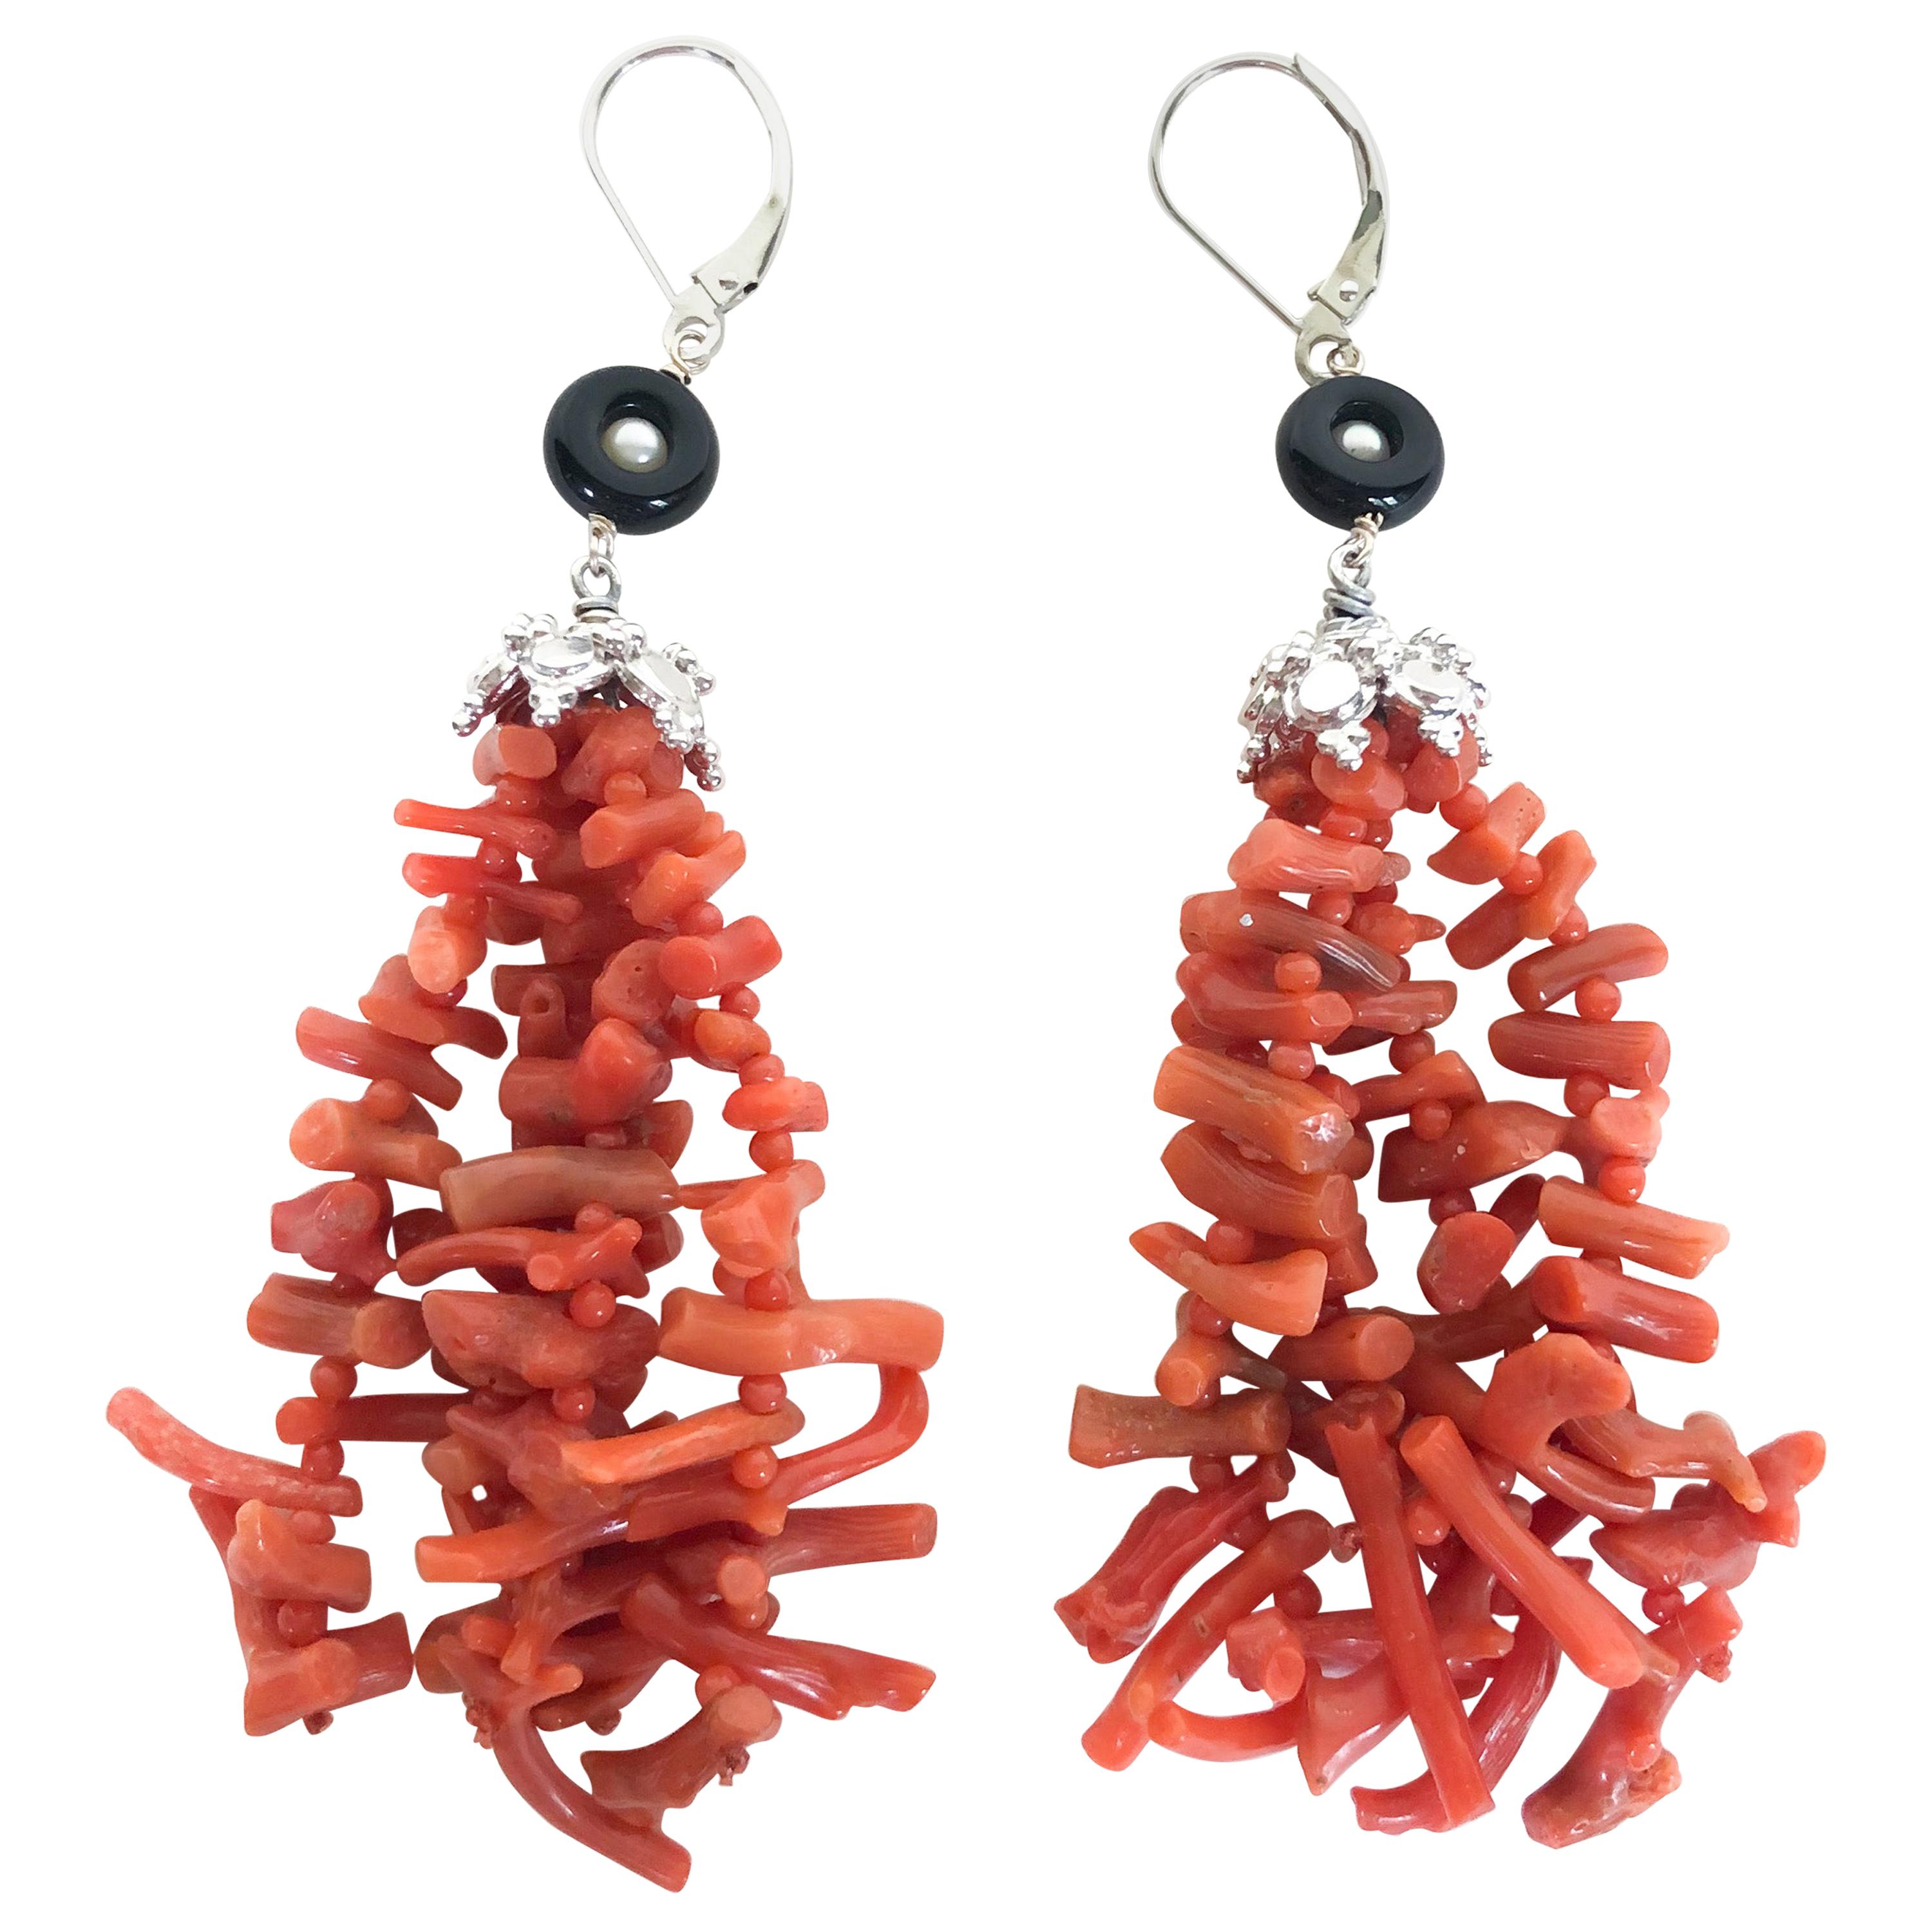 These gorgeous coral tassel earrings are vibrant and unique, which will be sure to make a statement with any look. The tassels are made of graduated coral sticks up to 2.5cm wide and 1mm coral beads. This pair features rhodium plated silver cup and